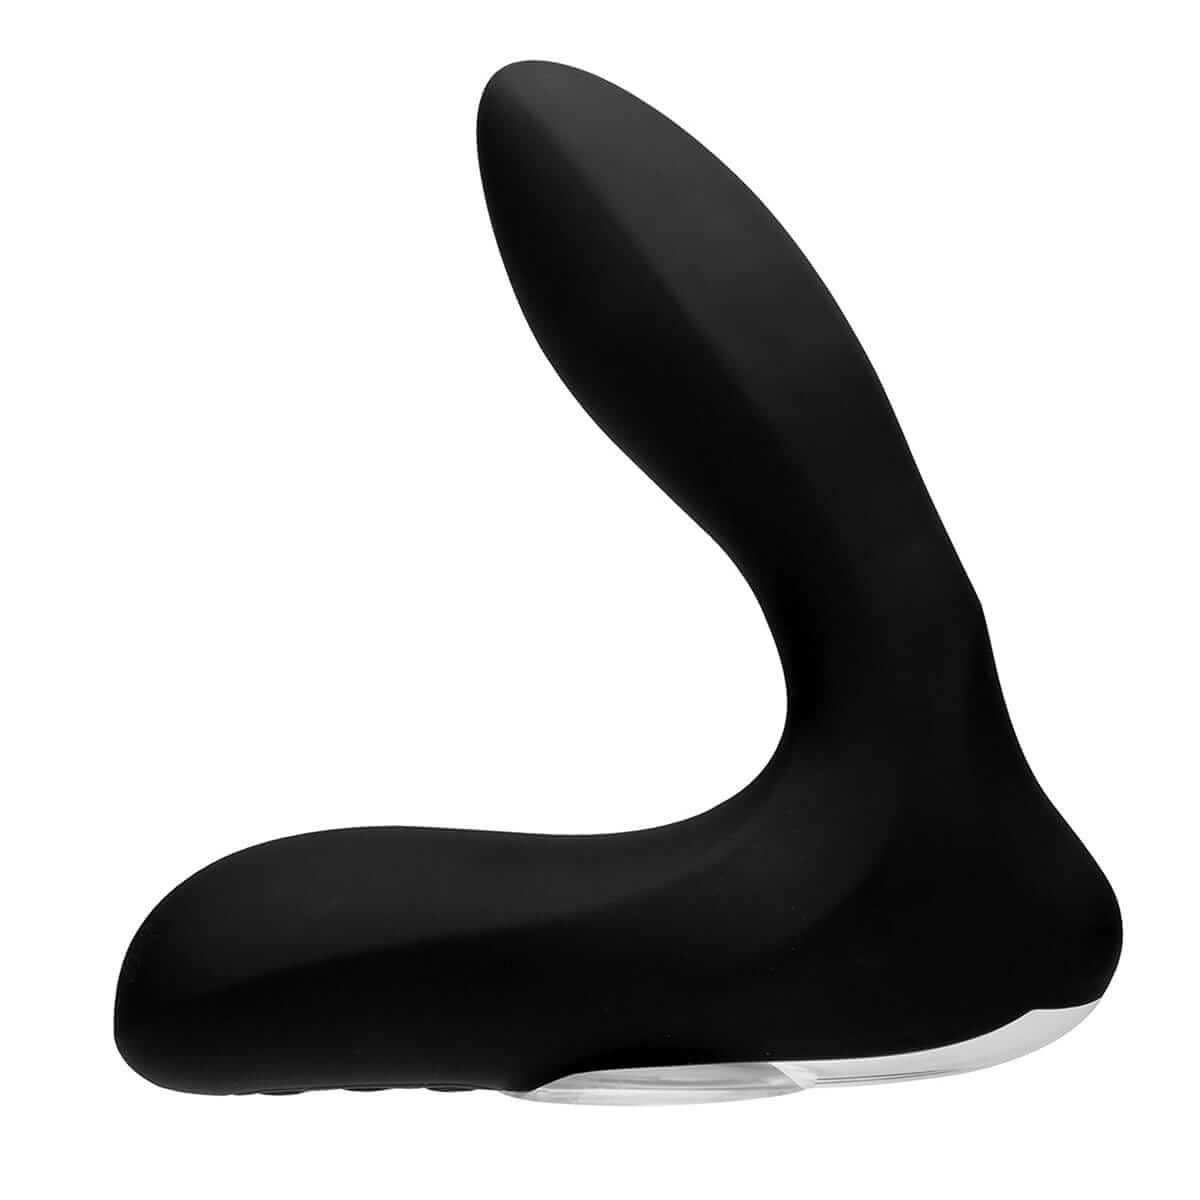 Prostatic Play P-Swell 12x Inflatable Prostate Vibrator - Thorn & Feather Sex Toy Canada